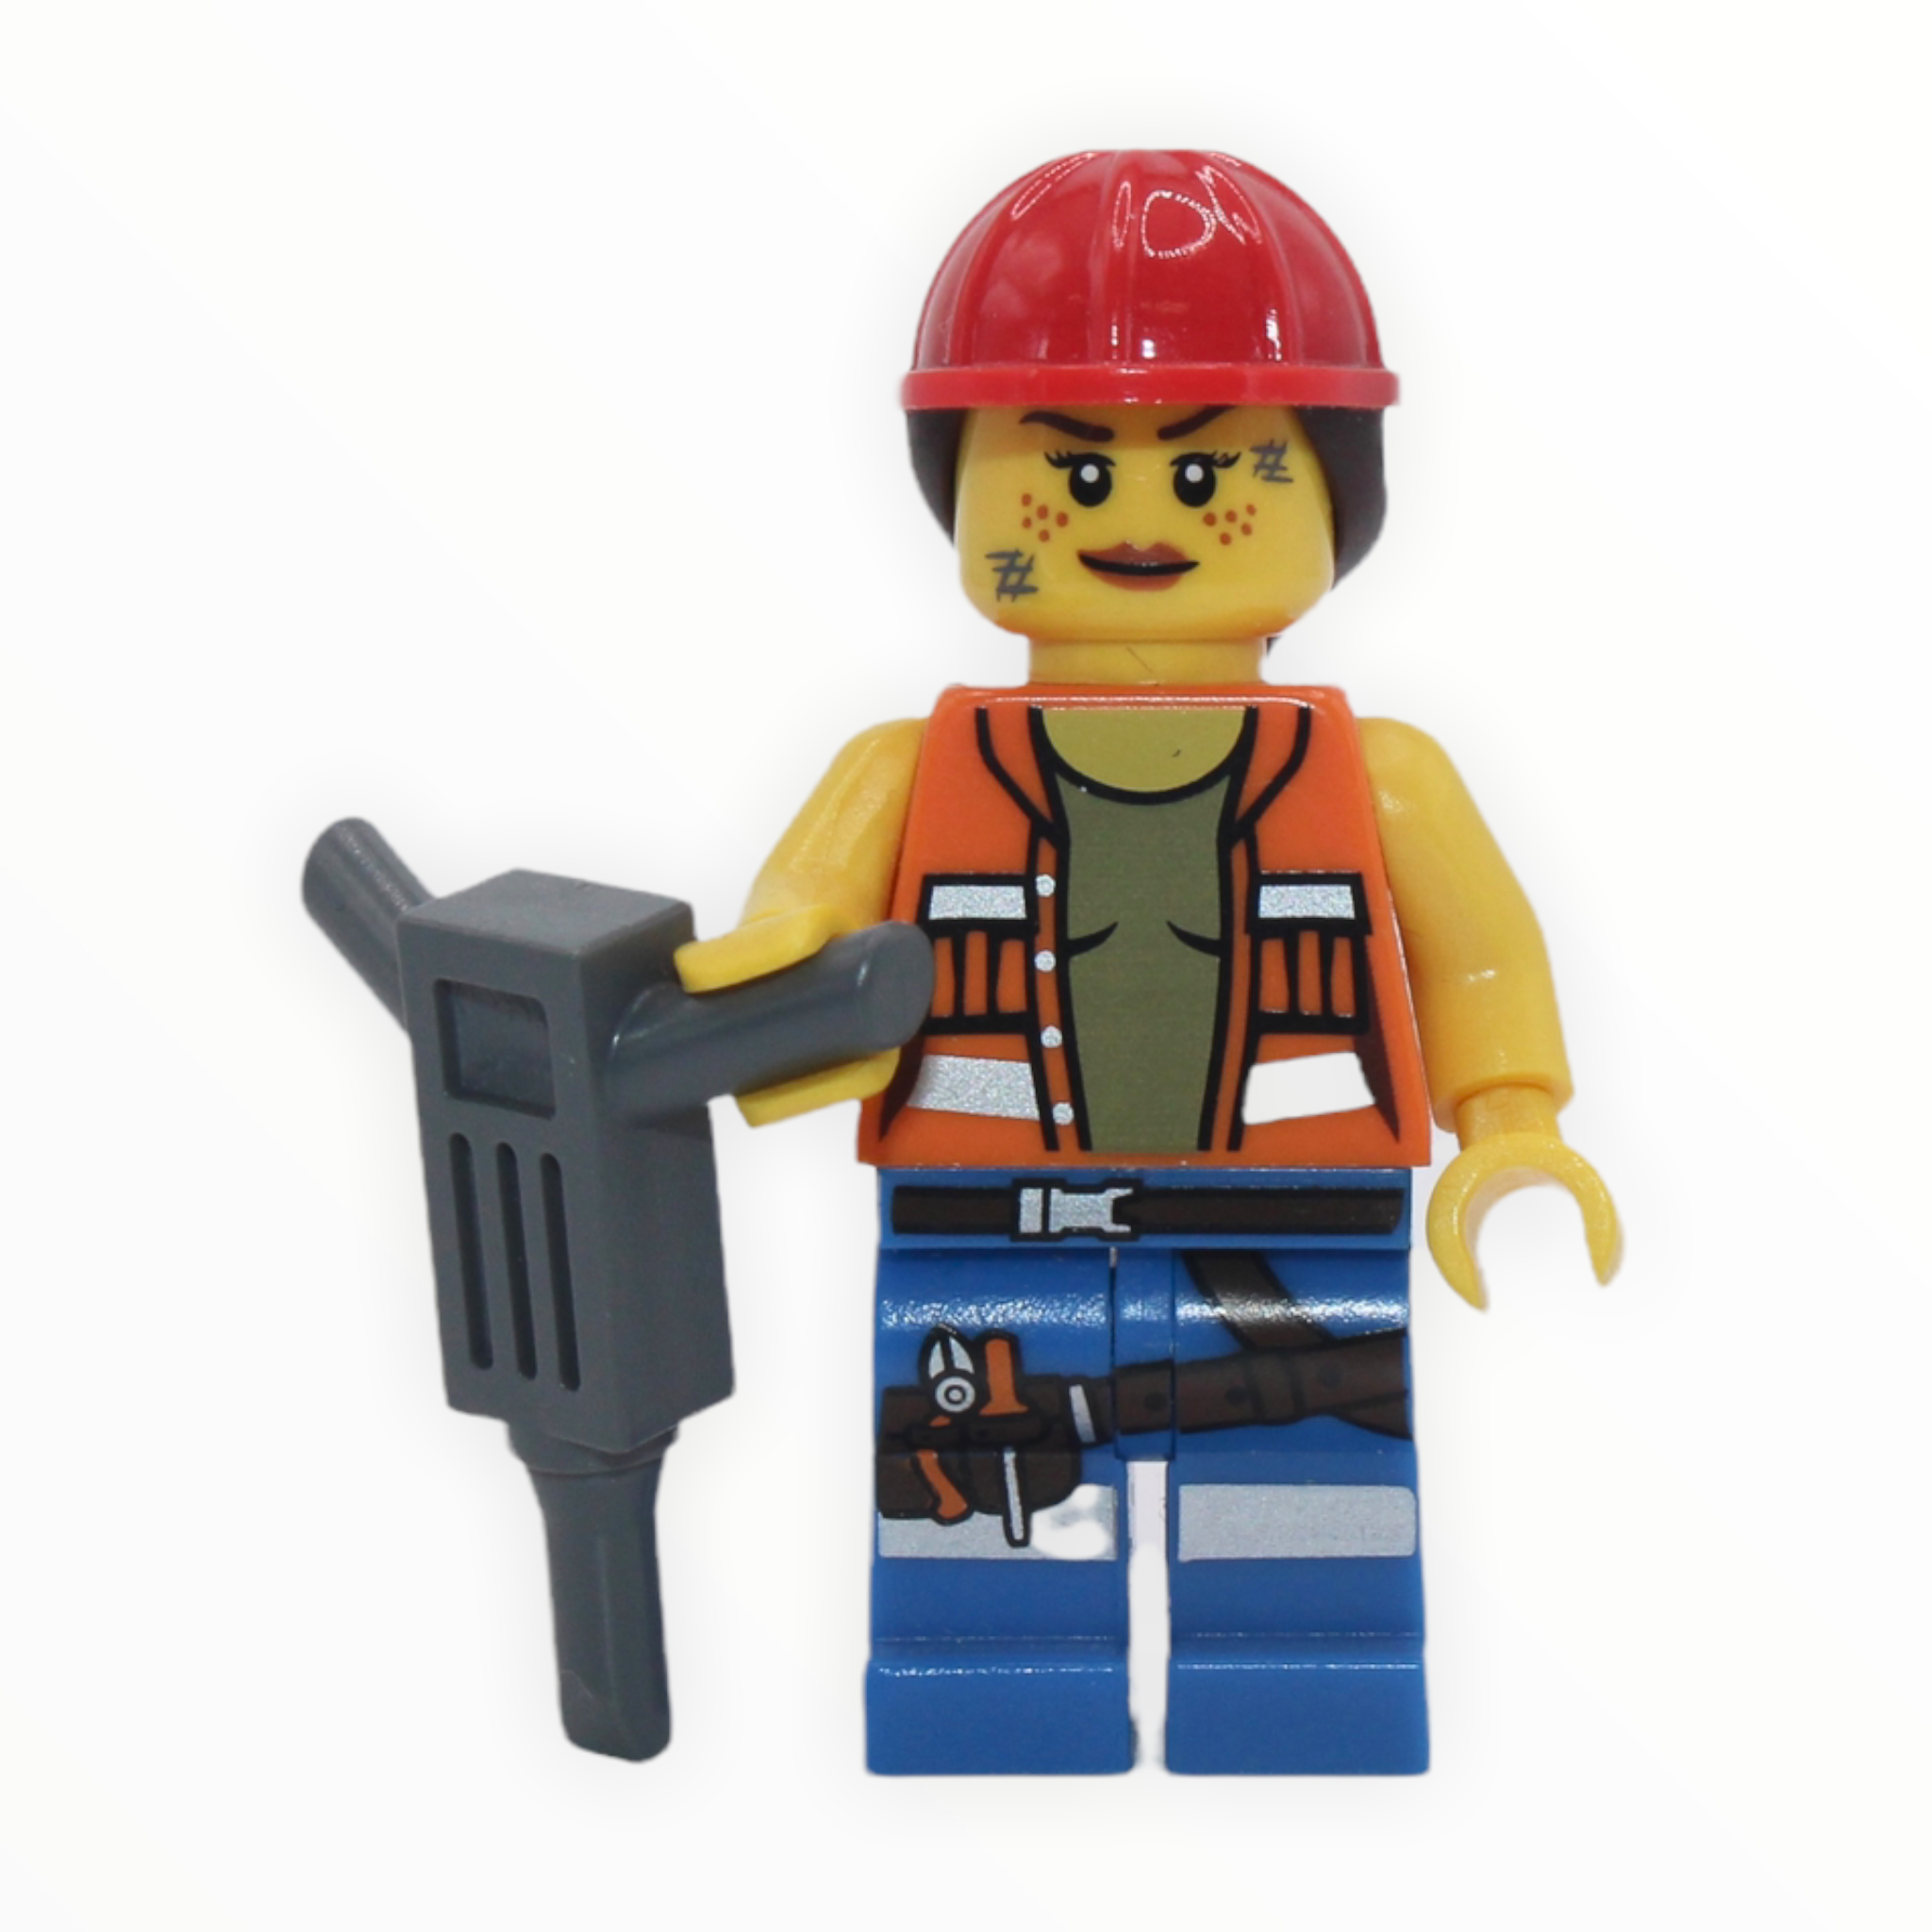 LEGO Movie Series: Gail the Construction Worker